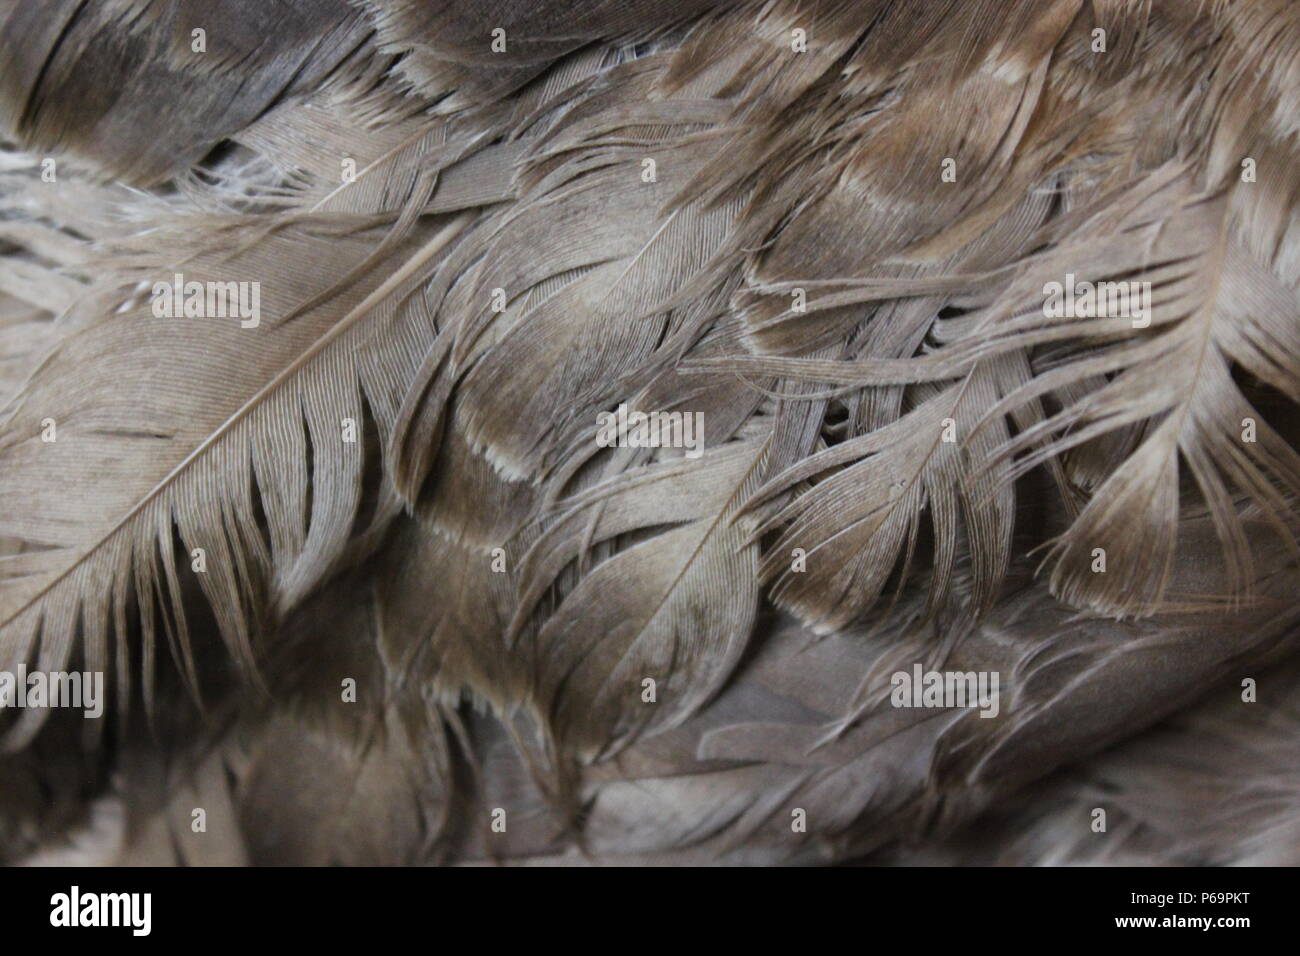 Closeup of brown feathers and plumage of a wild bird. Stock Photo